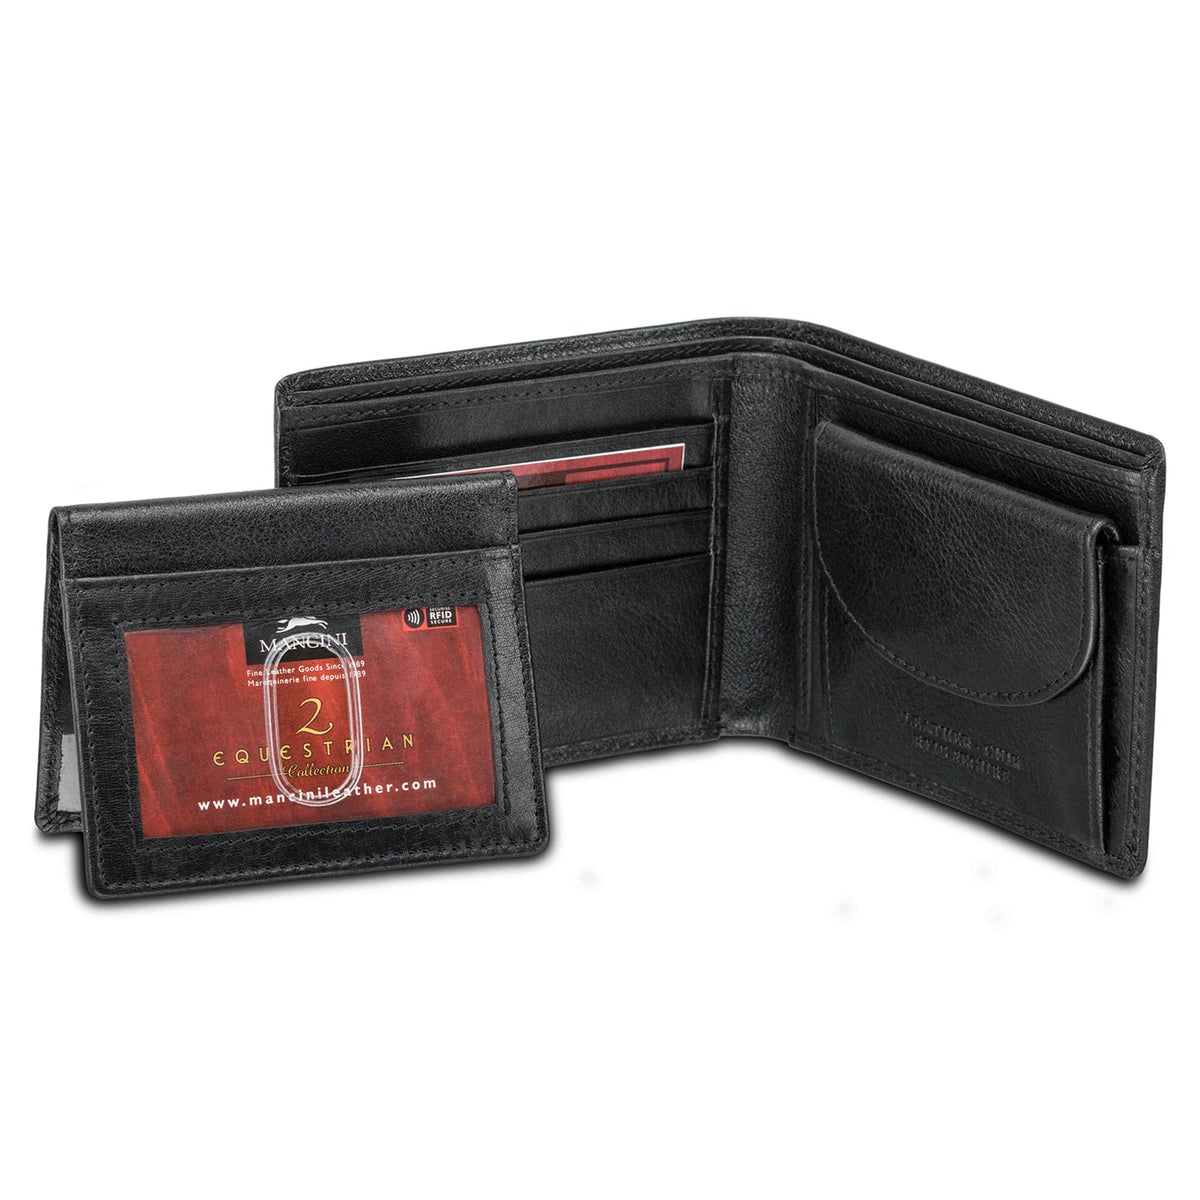 Mancini Equestrian2 RFID Billfold with Removable Left Wing Passcase and Coin Pocket